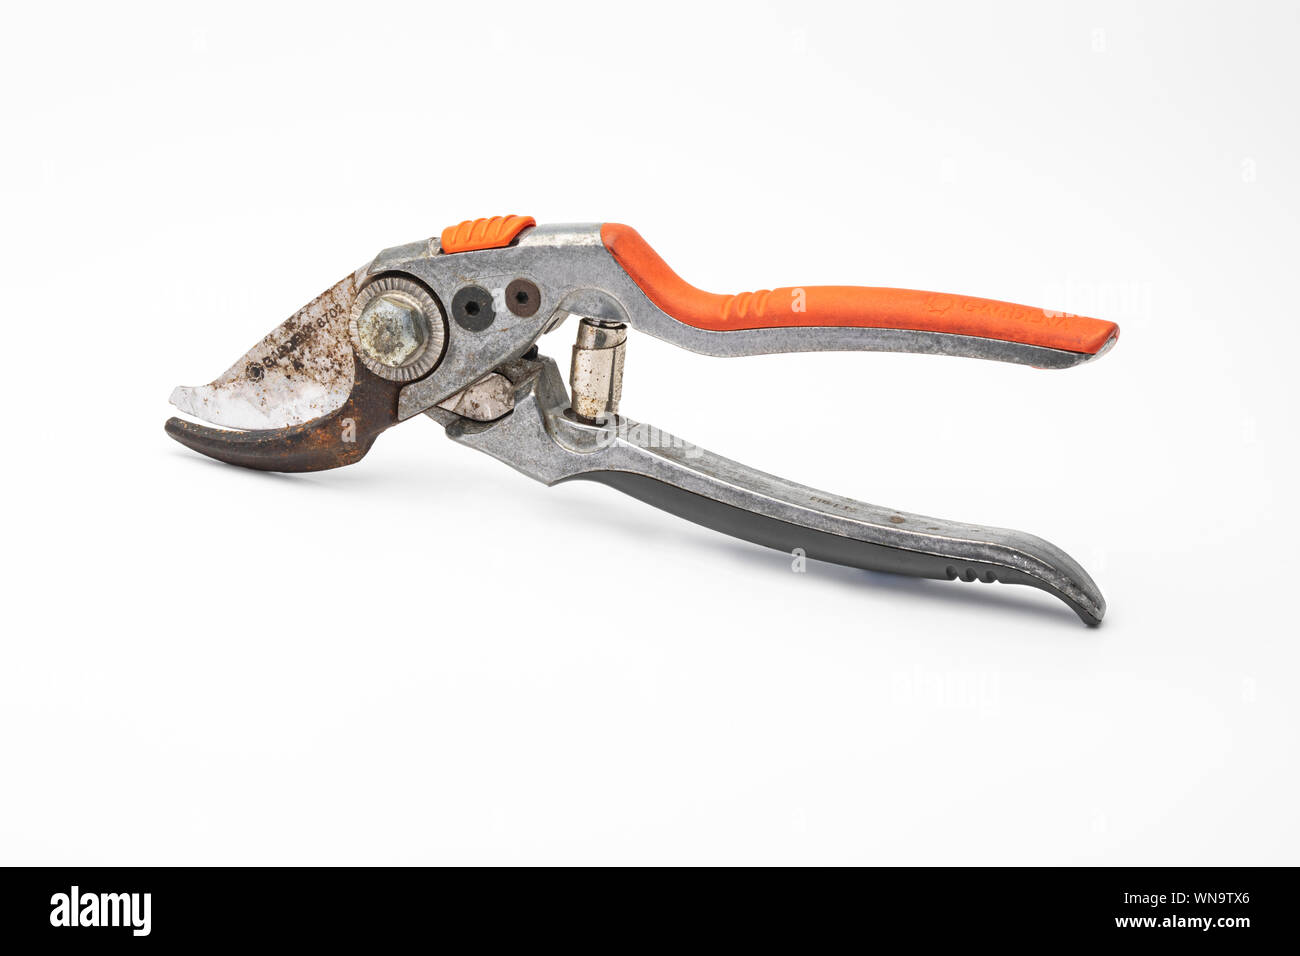 Well used garden secateurs Stock Photo